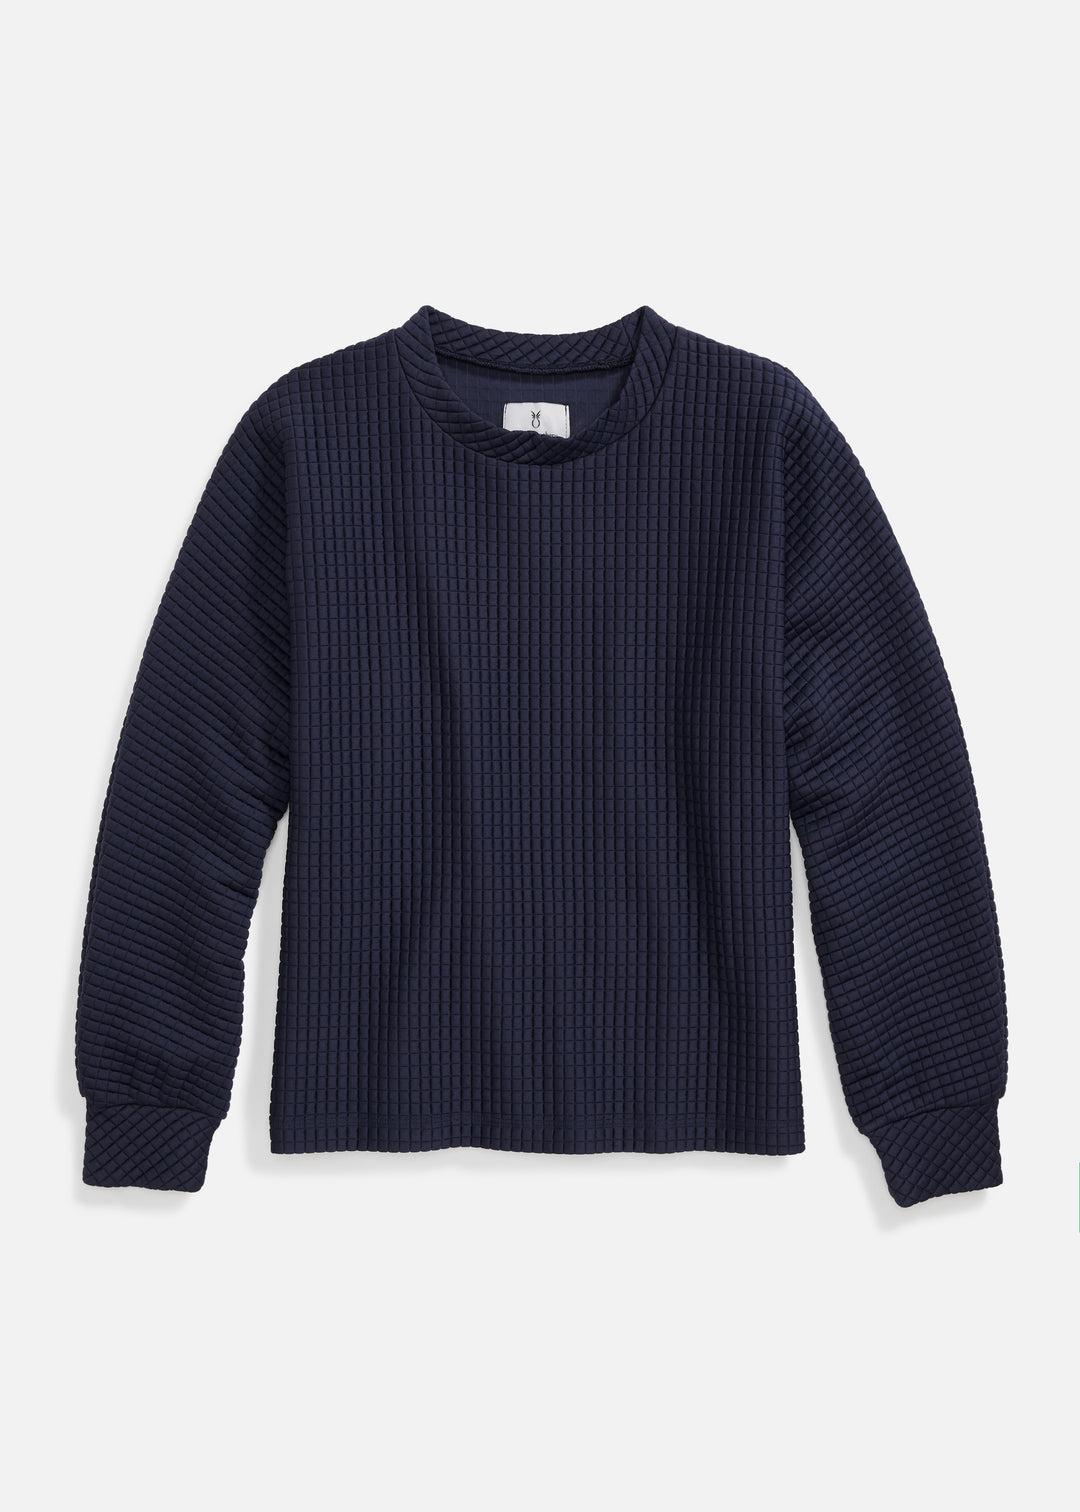 P'town Pullover in Waffle (Navy)